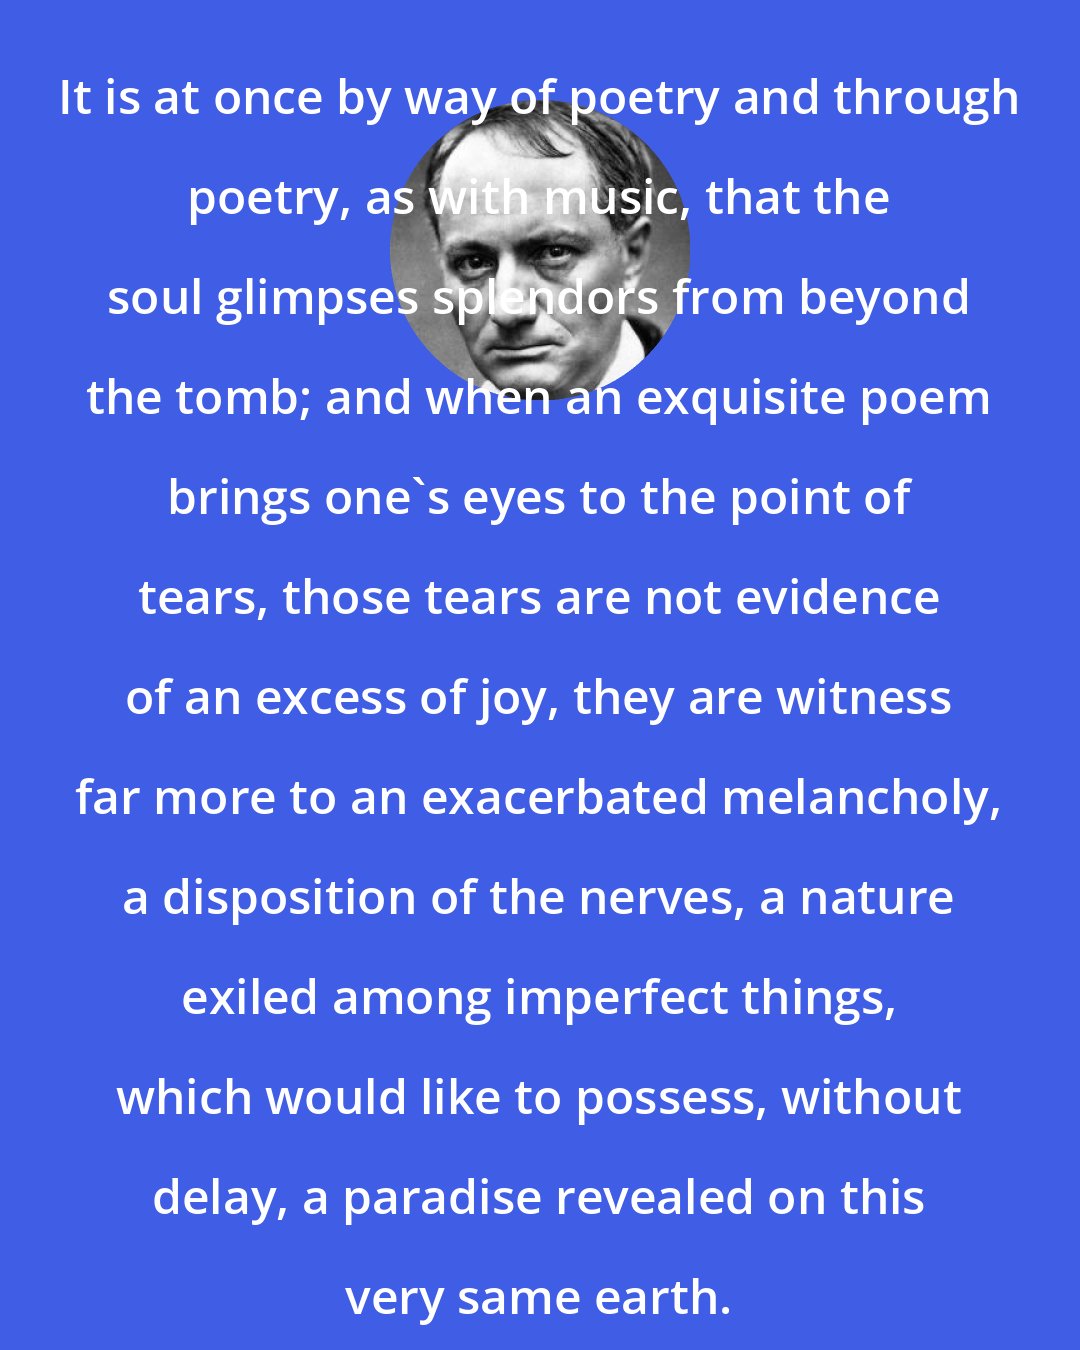 Charles Baudelaire: It is at once by way of poetry and through poetry, as with music, that the soul glimpses splendors from beyond the tomb; and when an exquisite poem brings one's eyes to the point of tears, those tears are not evidence of an excess of joy, they are witness far more to an exacerbated melancholy, a disposition of the nerves, a nature exiled among imperfect things, which would like to possess, without delay, a paradise revealed on this very same earth.